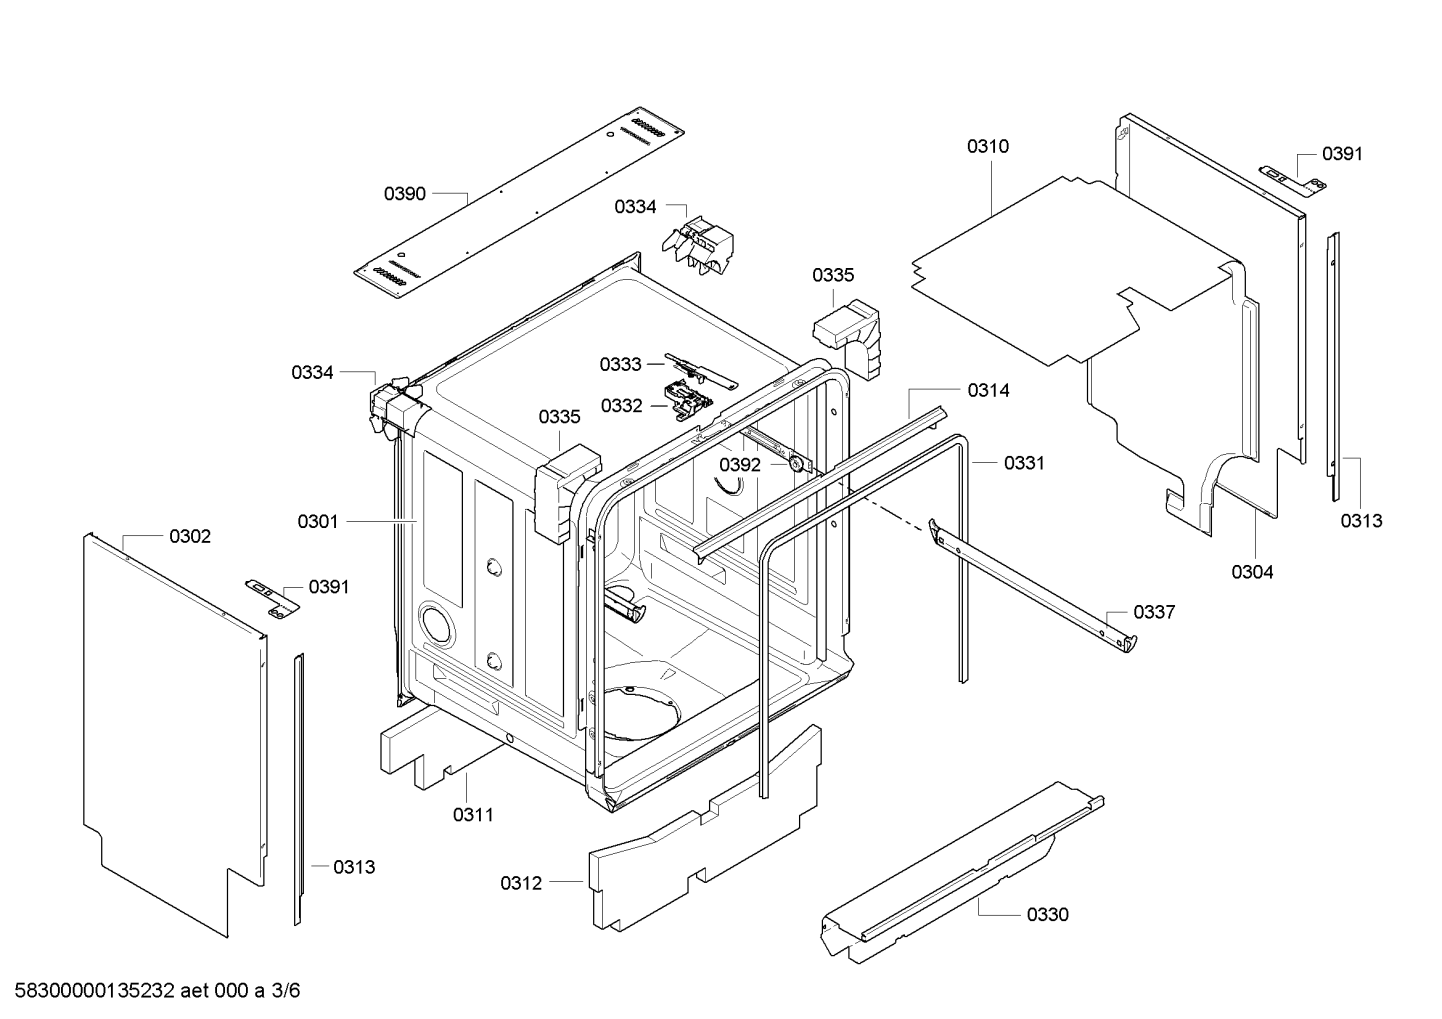 drawing_link_3_device_1558591